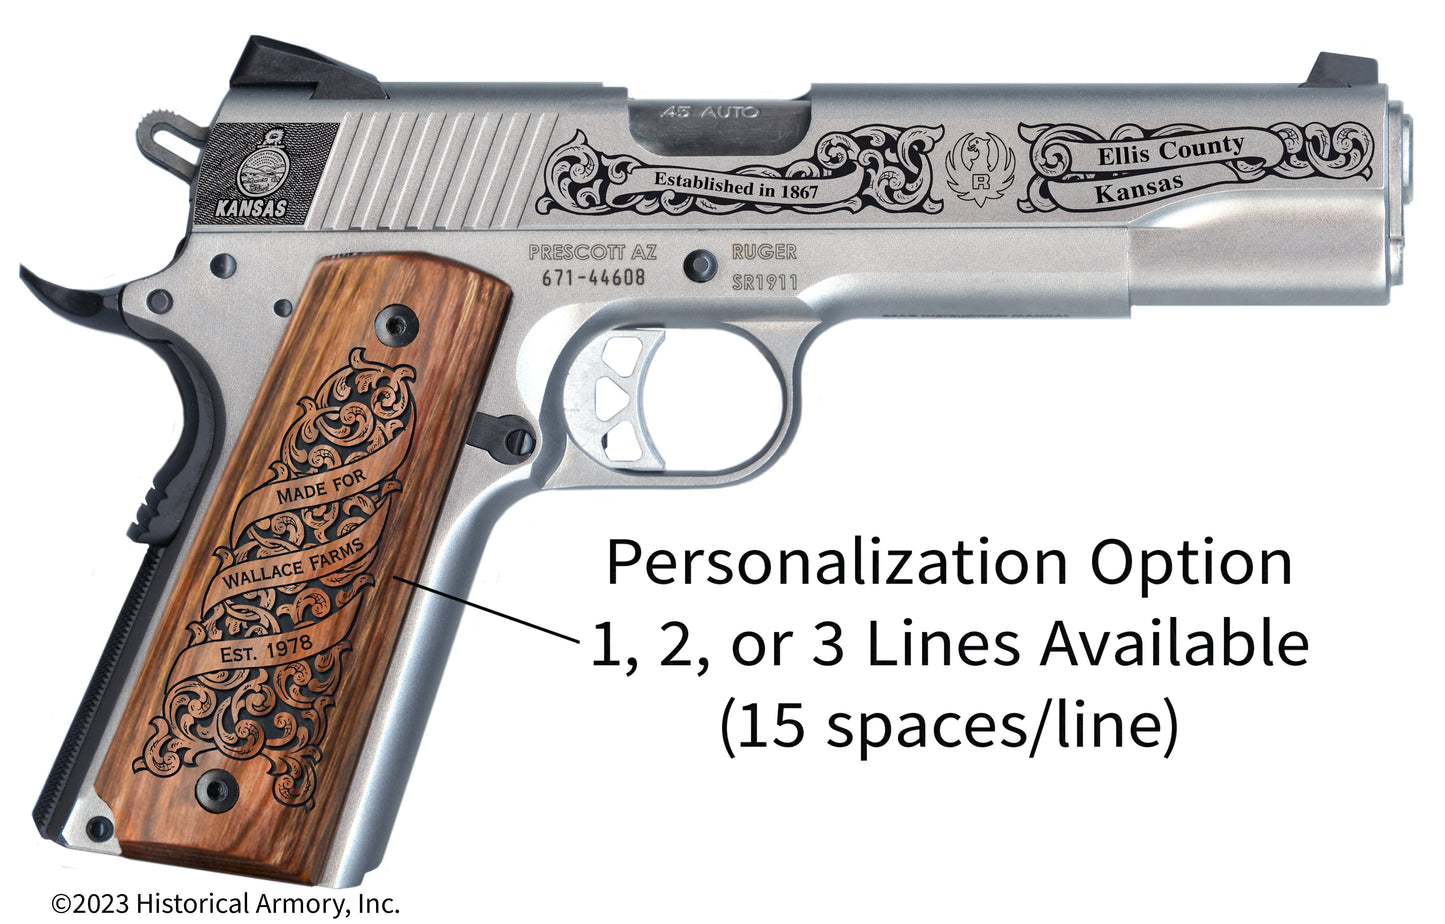 Ellis County Kansas Personalized Engraved .45 Auto Ruger 1911